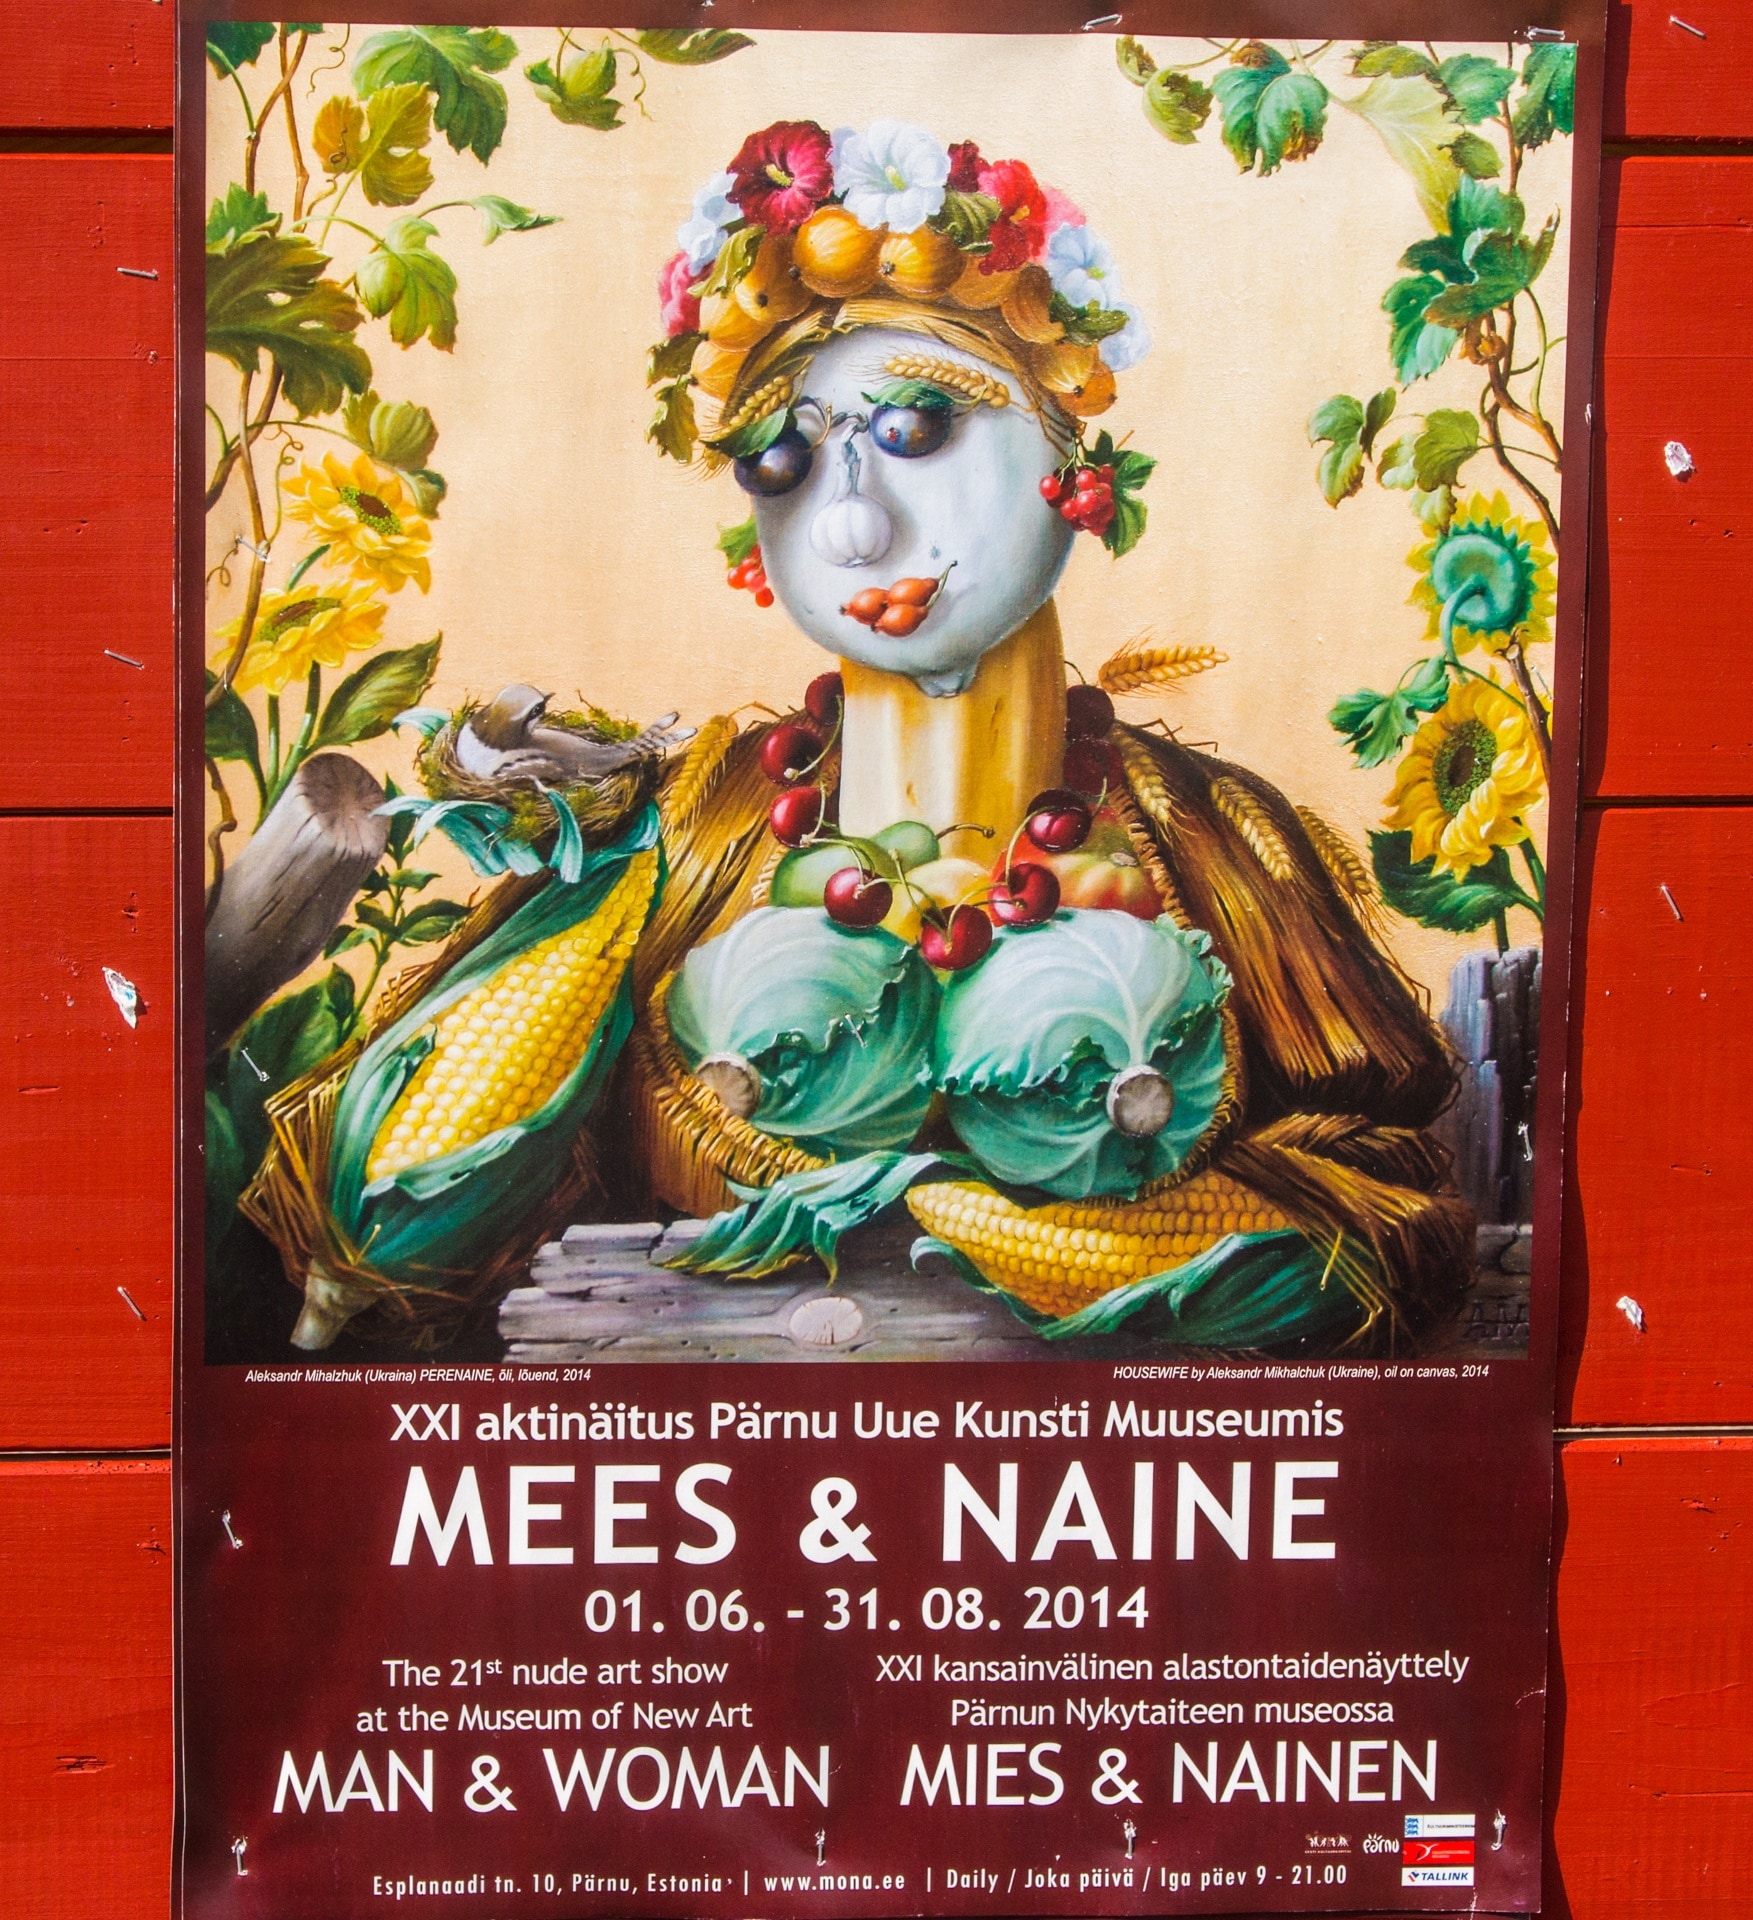 mees & naine poster